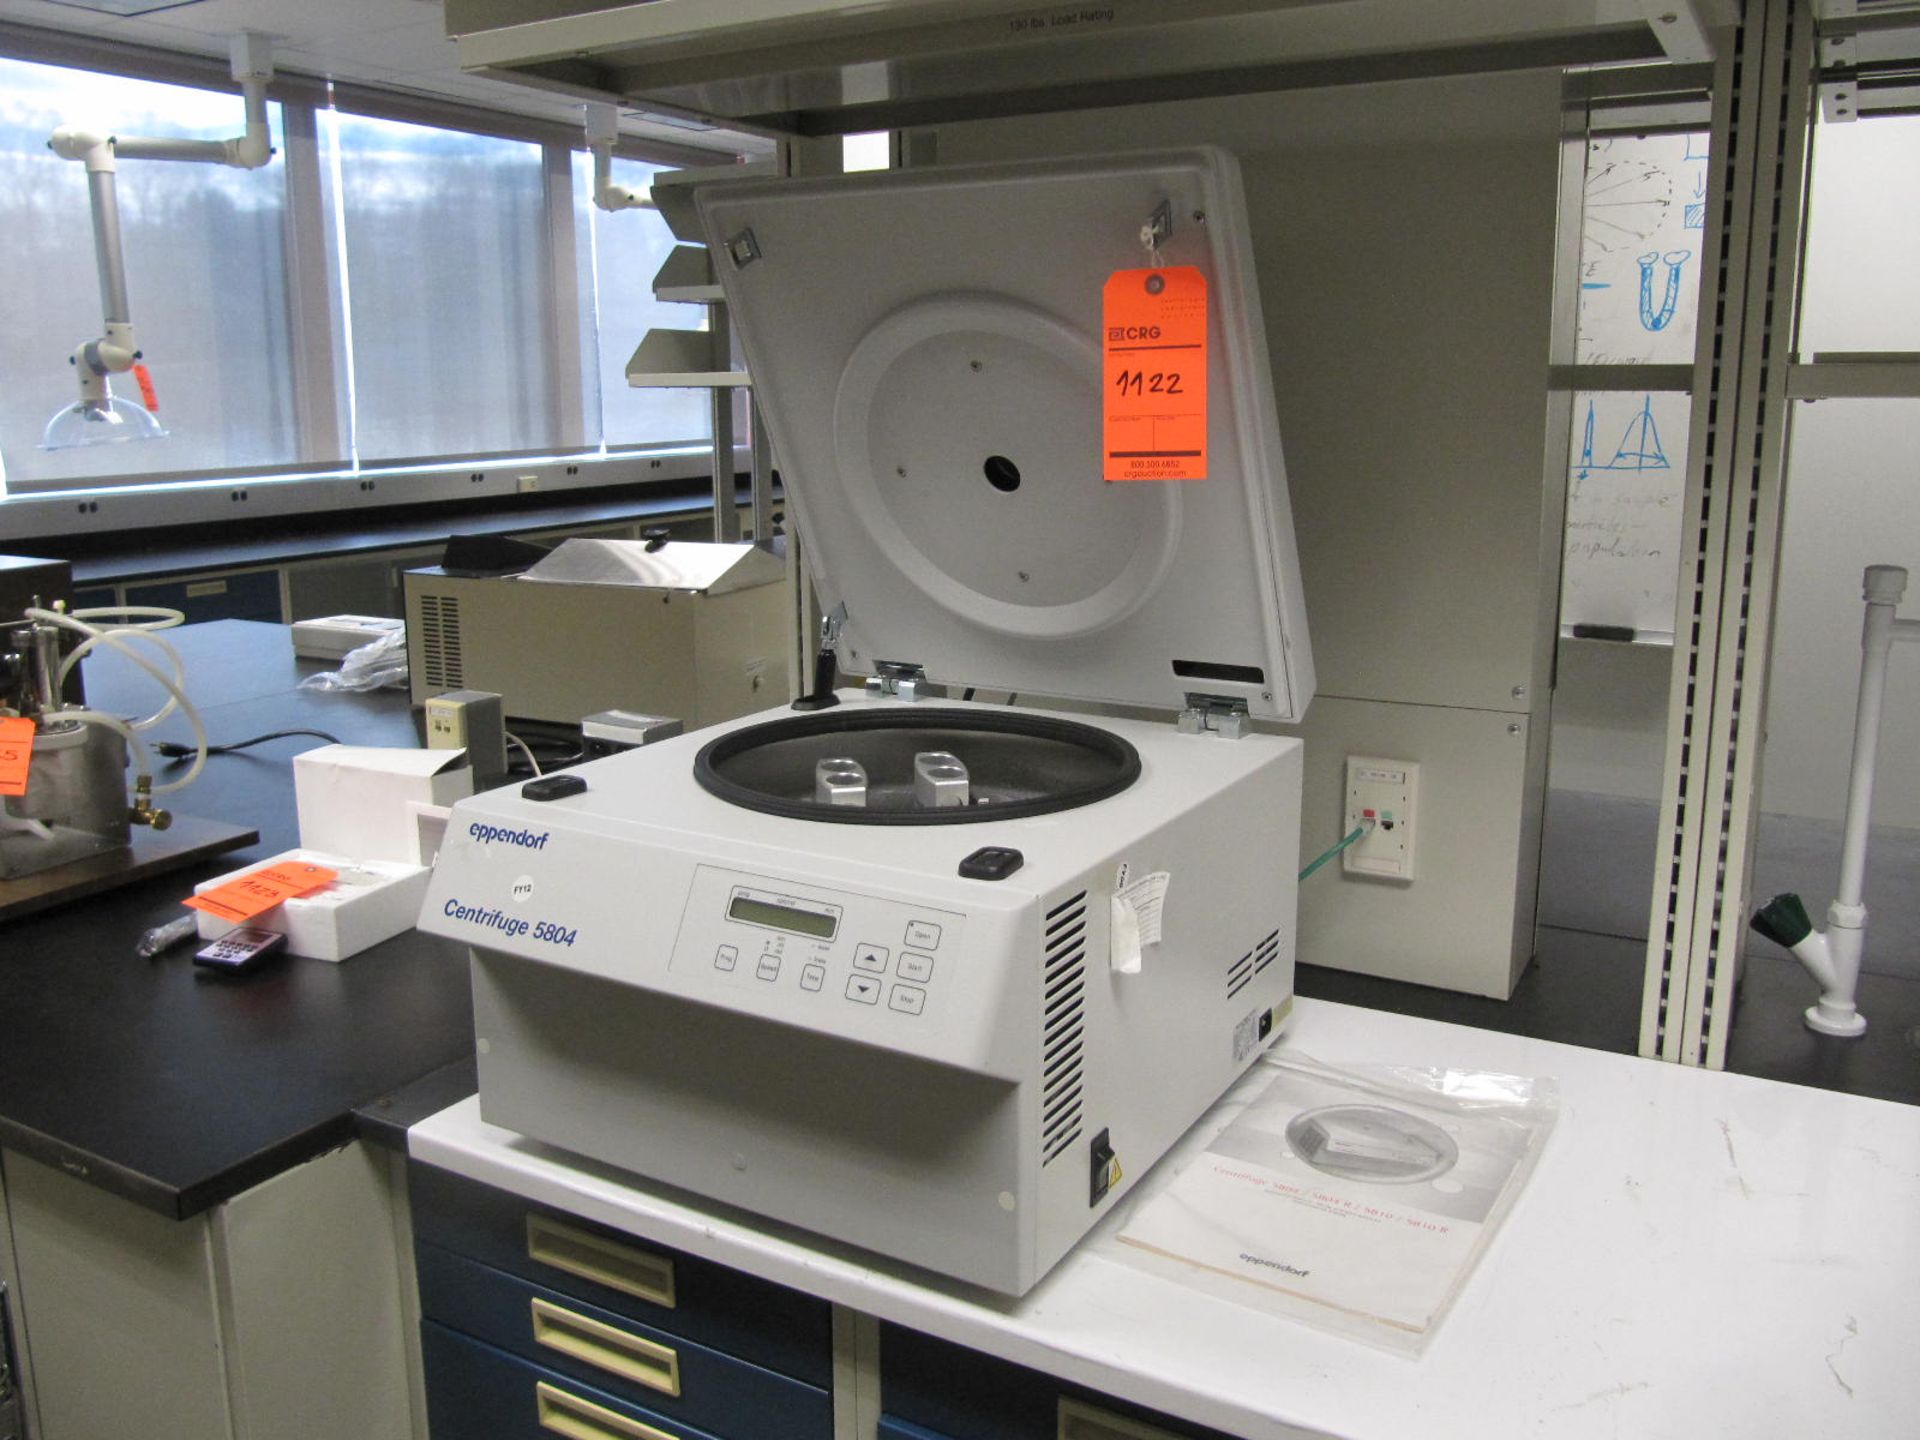 Eppendorf 5804 centrifuge, s/n 01745, located in building 5, 5th floor, room F503